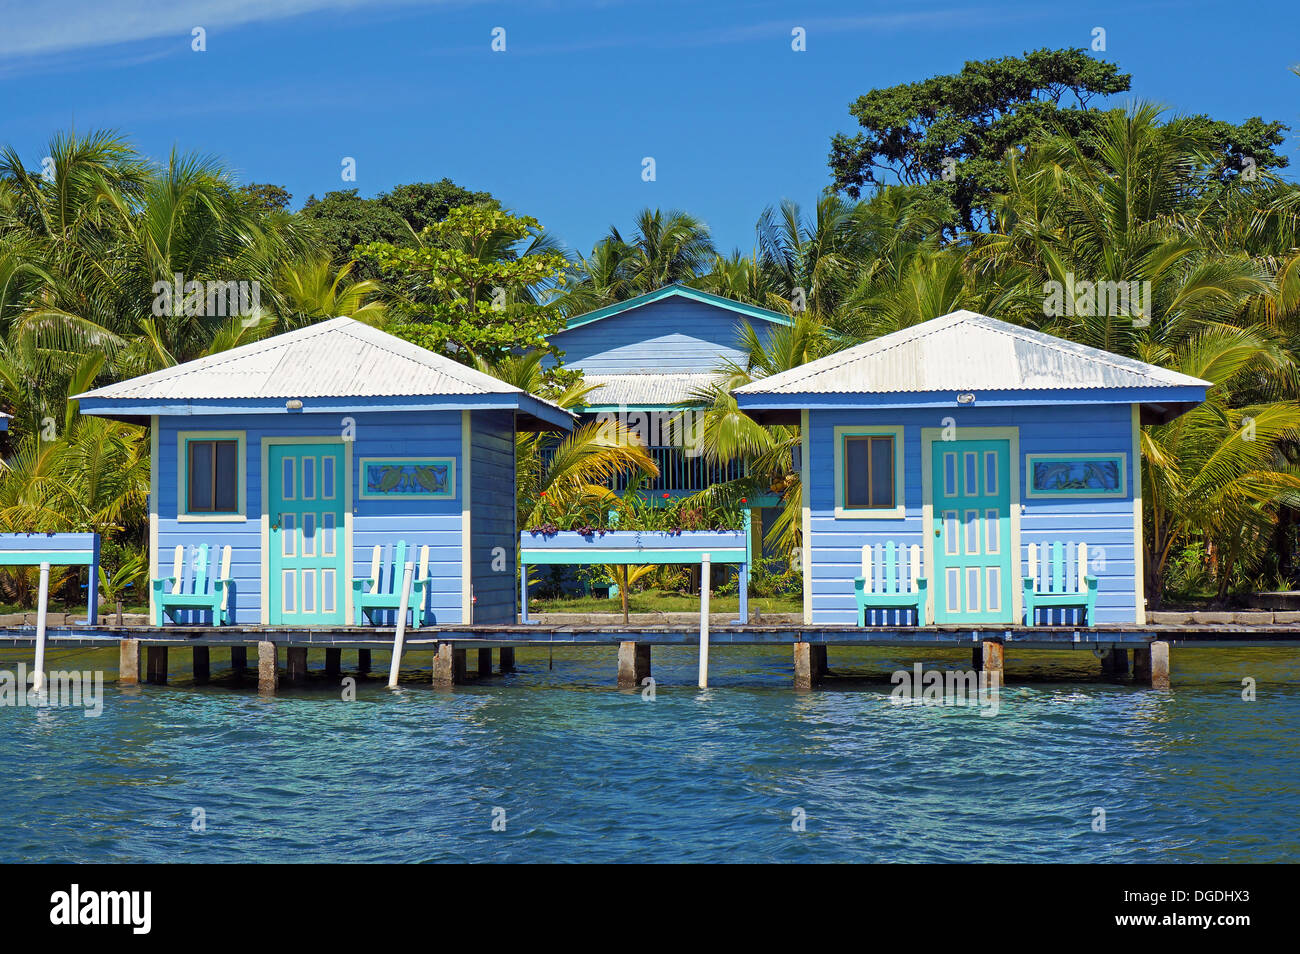 Overwater bungalows with palm trees in background, Bocas del Toro, Caribbean sea, Central America, Panama Stock Photo